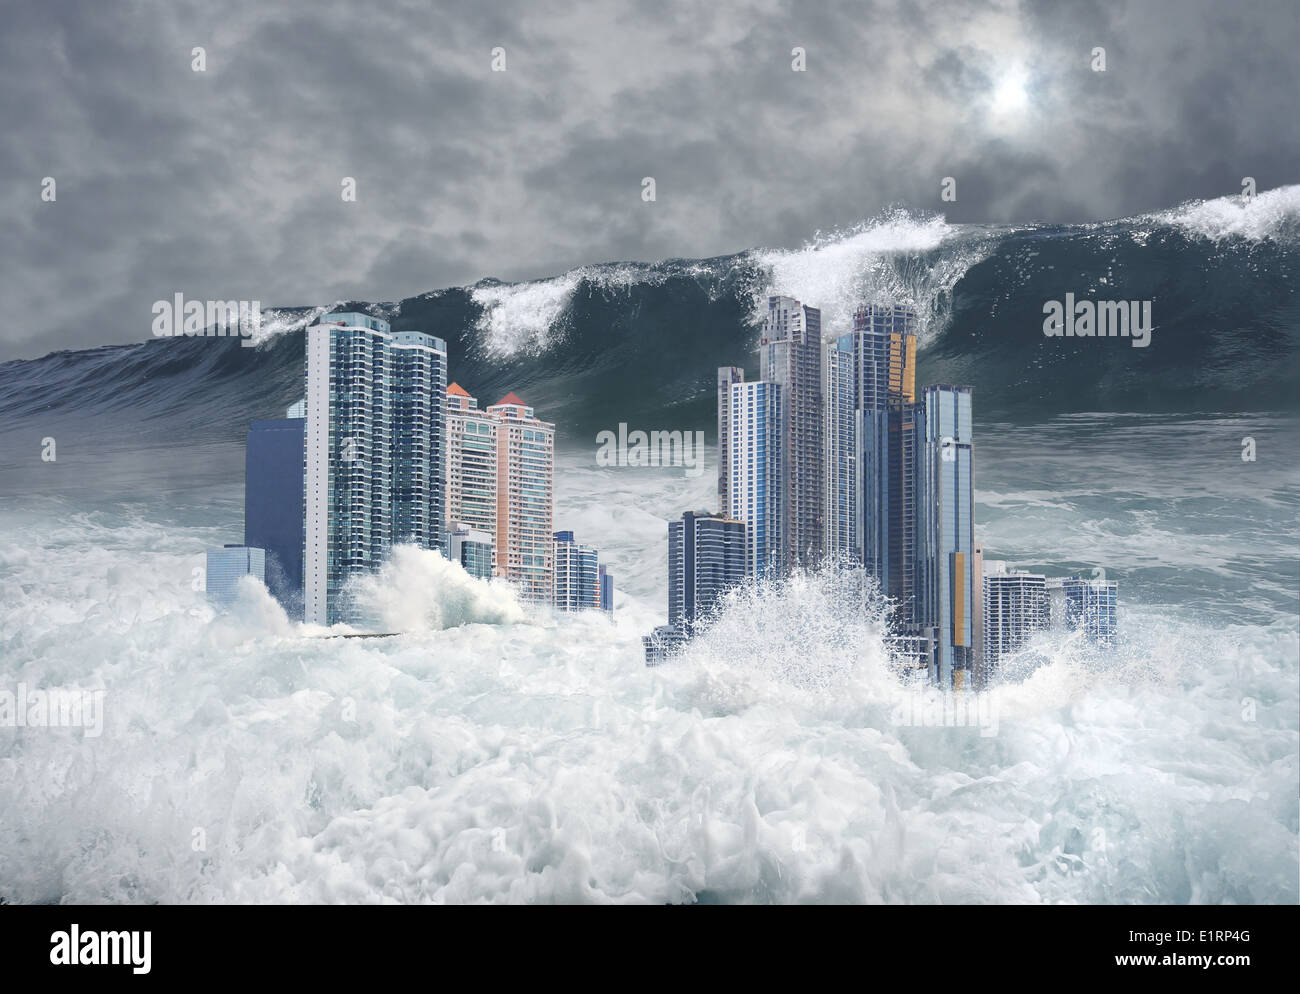 Apocalyptic scene of modern city's skyscrapers submerged by tsunami with a giant second wave coming Stock Photo